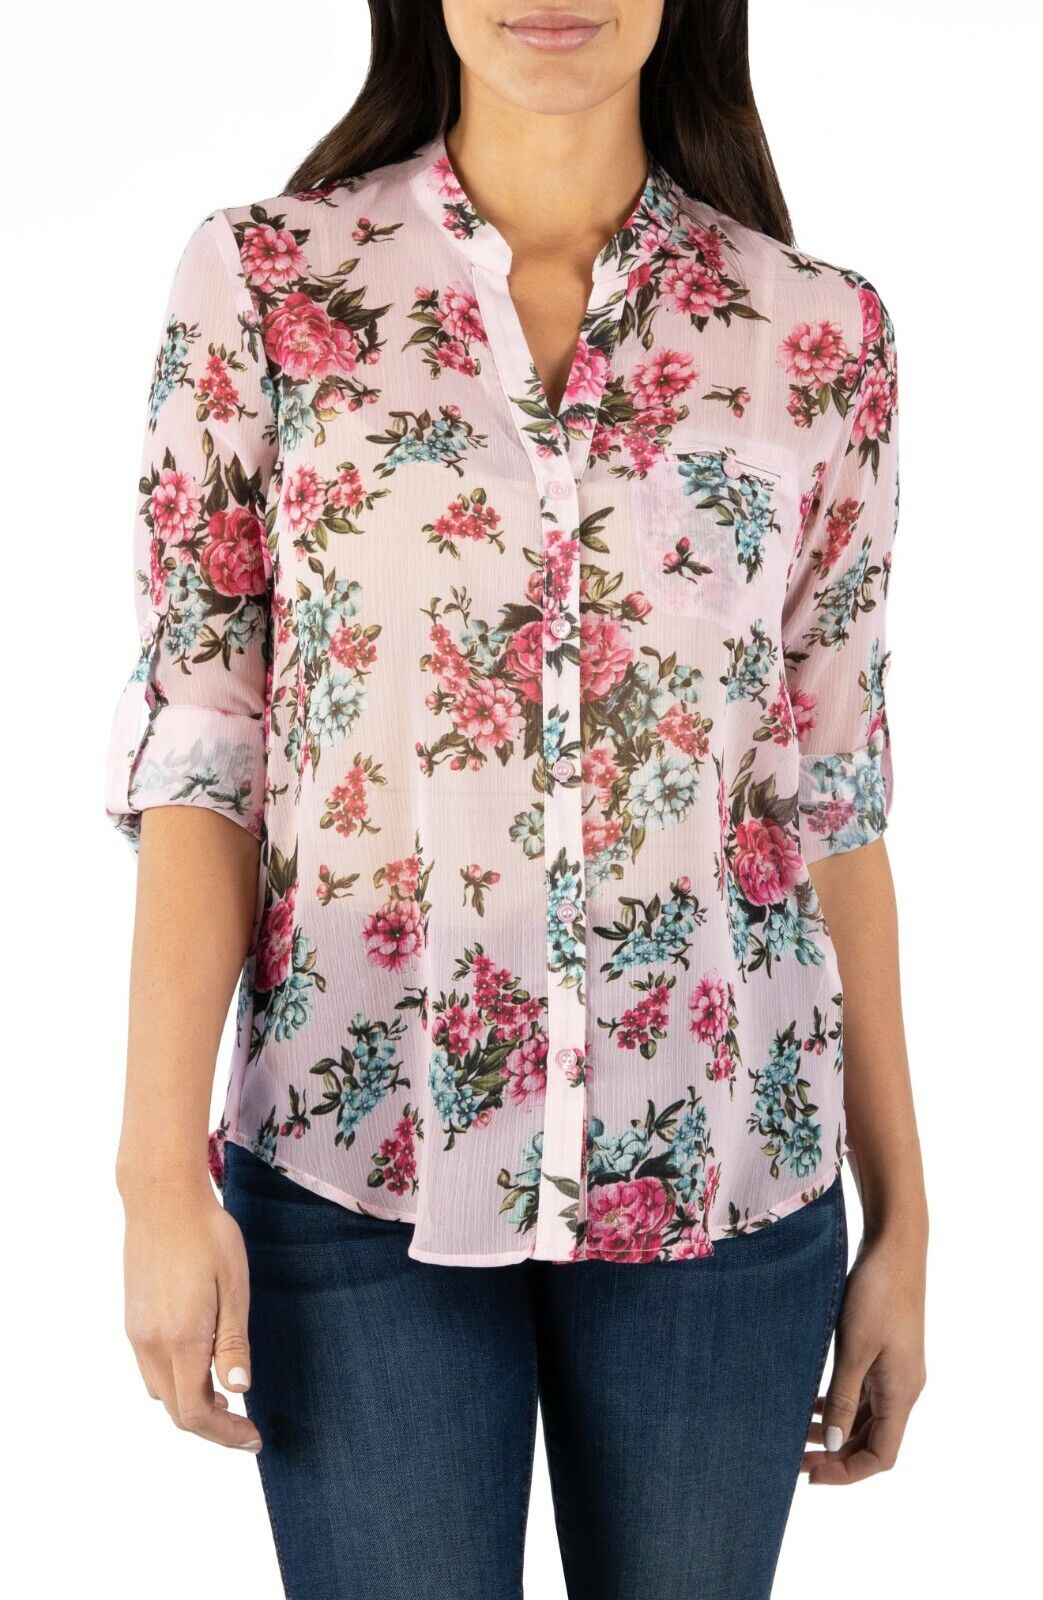 Kut from the Kloth Womens Jasmine Button Down Sheer Top Blouse Shirt Floral